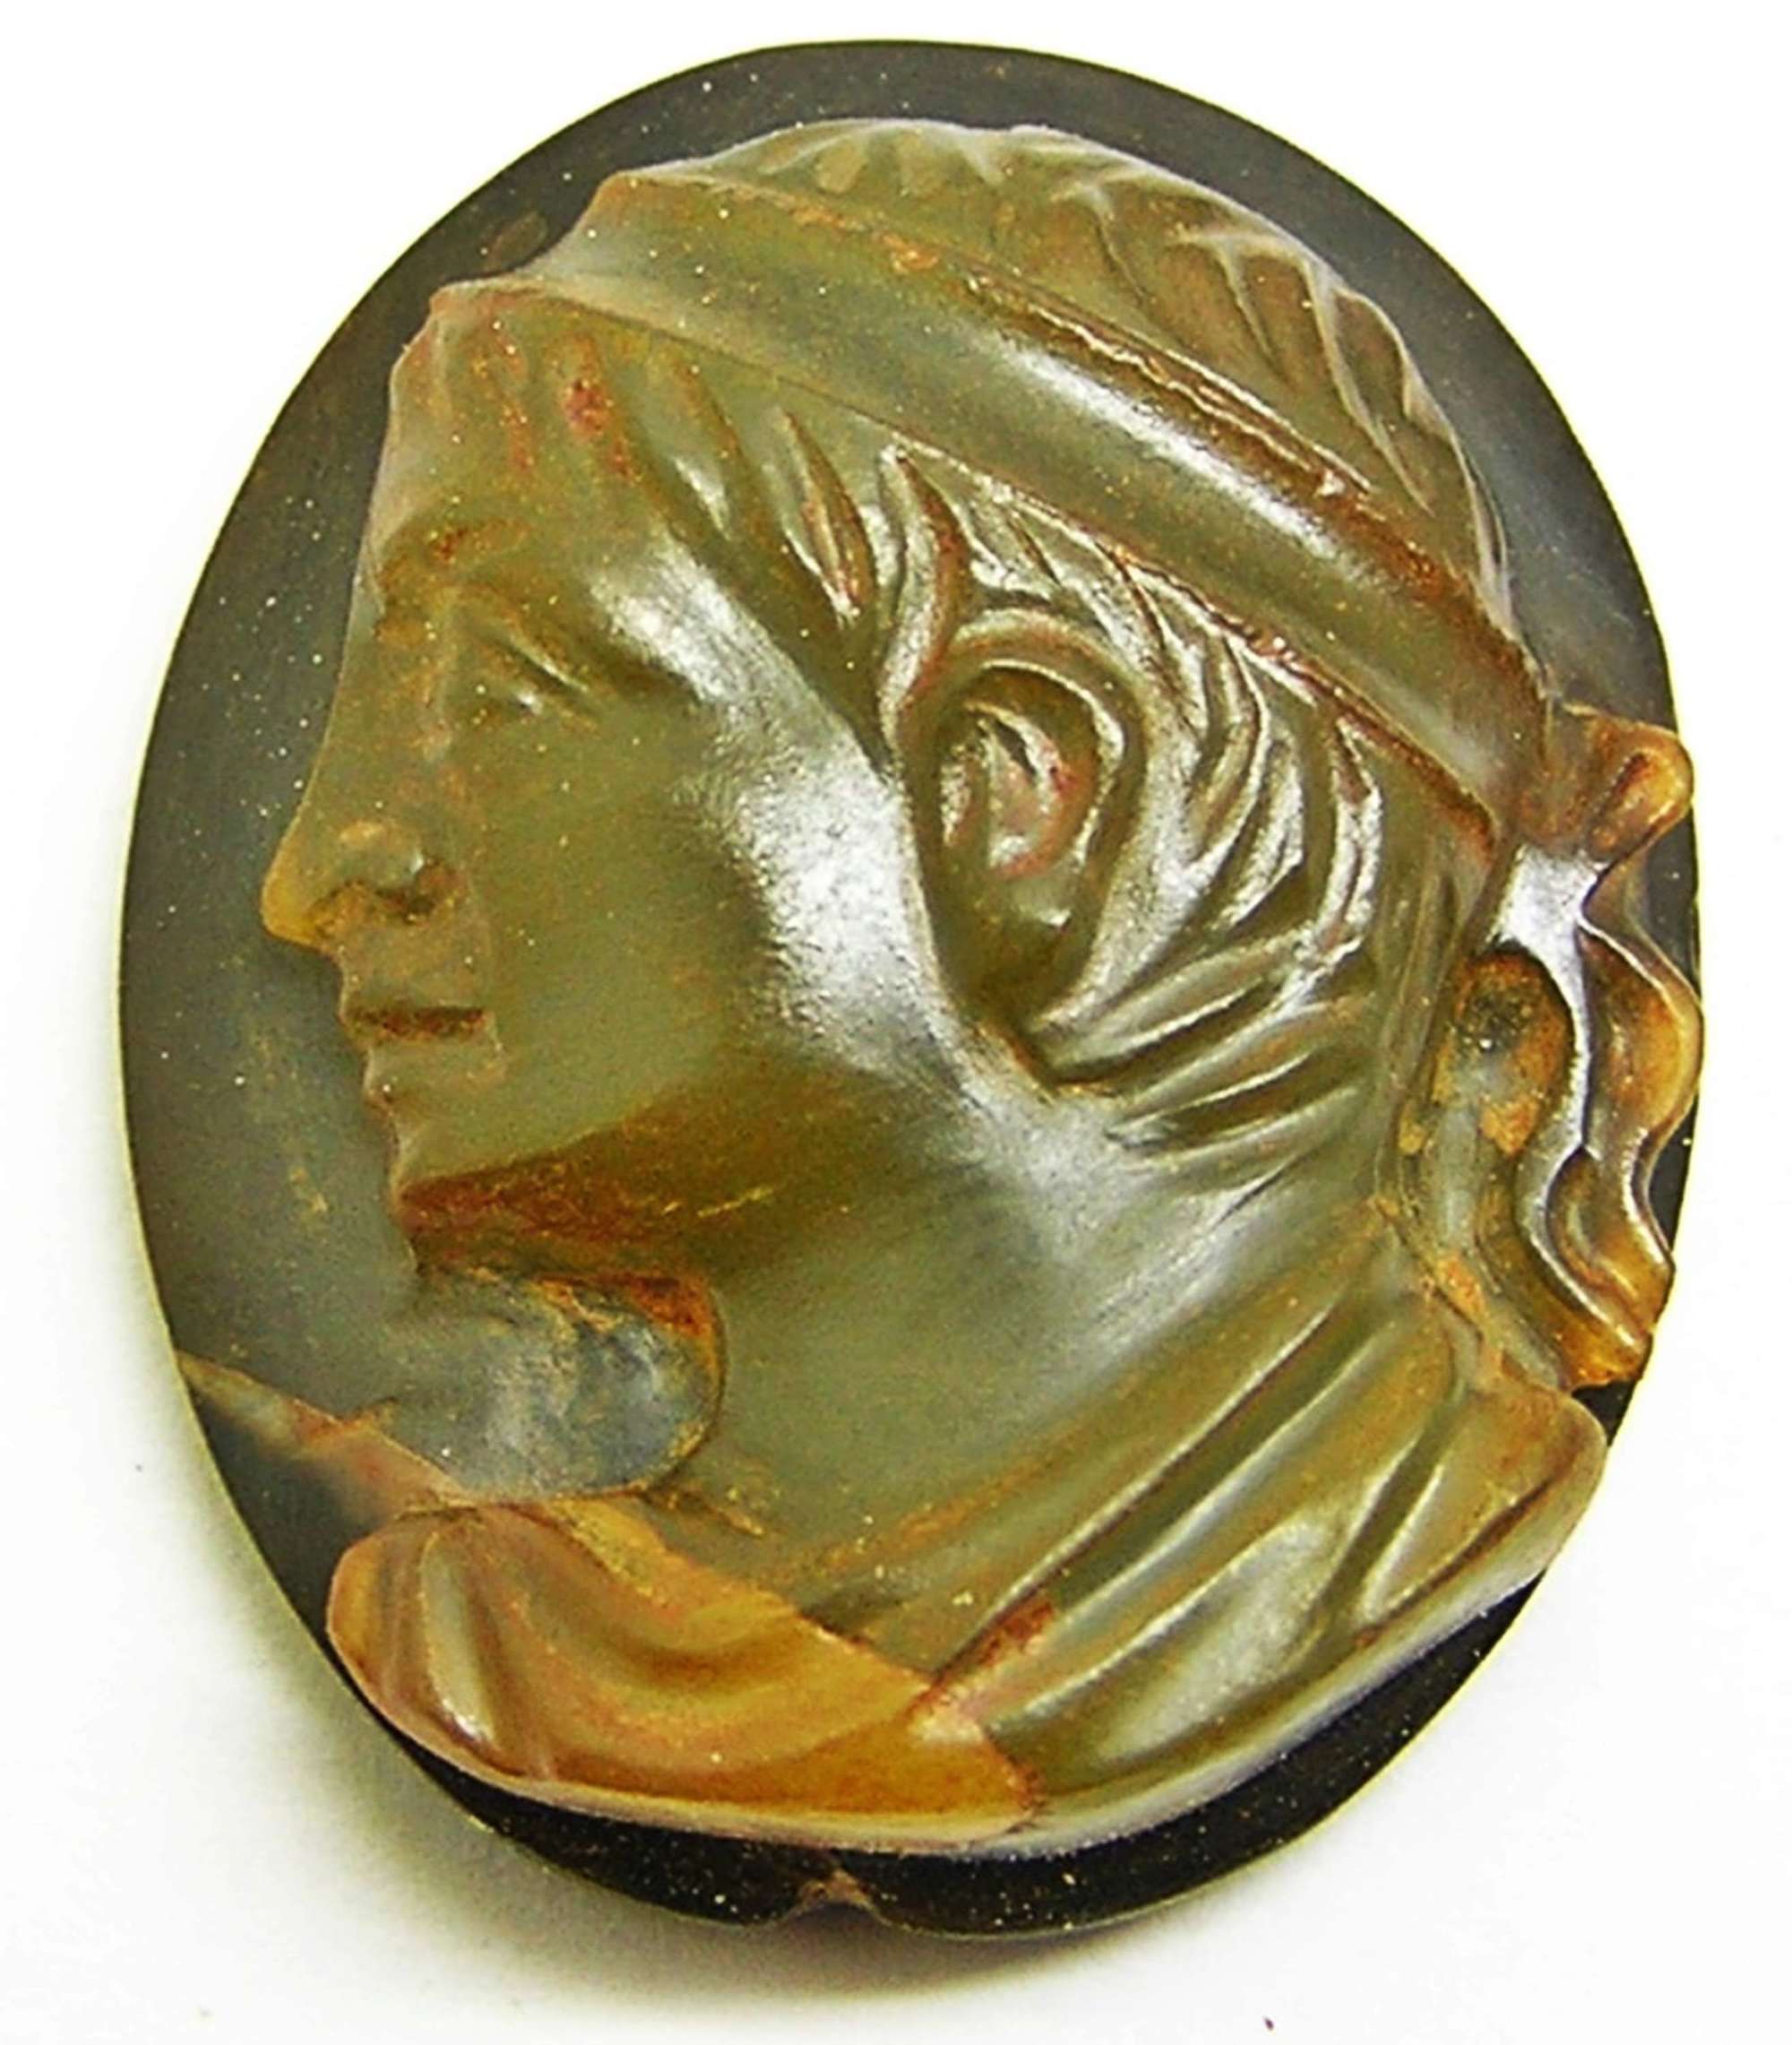 Hardstone cameo of a young prince